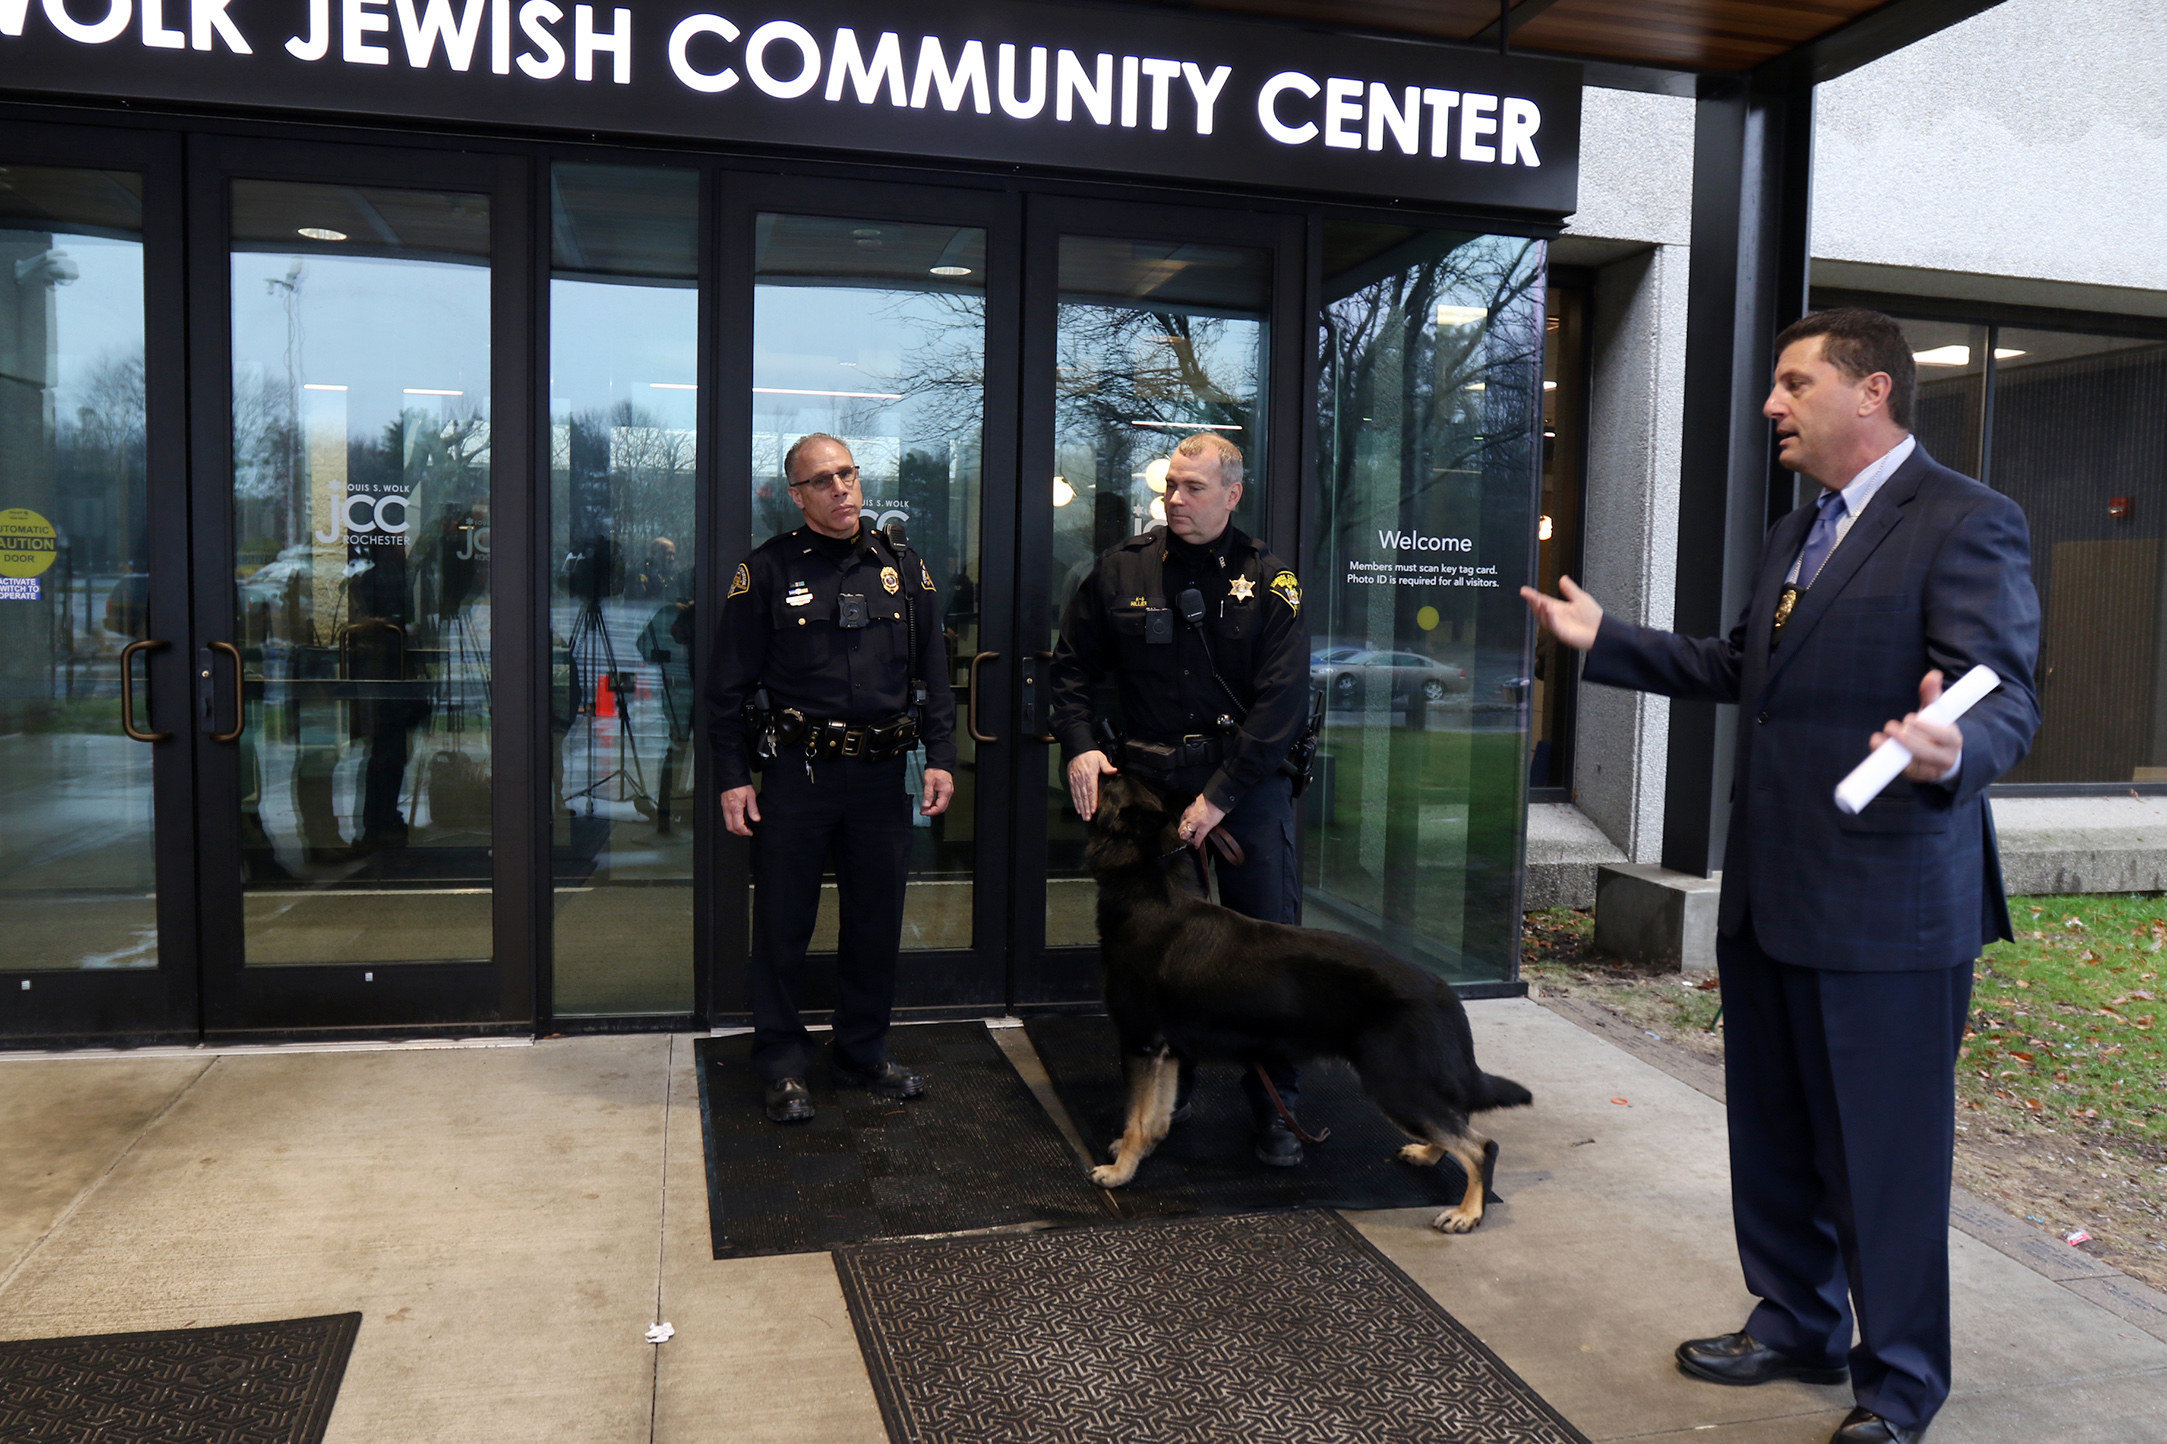 PHOTO: Brighton Police Chief Mark Henderson said there was no bomb found and investigation into the threat continues at the Louis S. Wolk Jewish Community Center, March 7, 2017, in Rochester, N.Y.